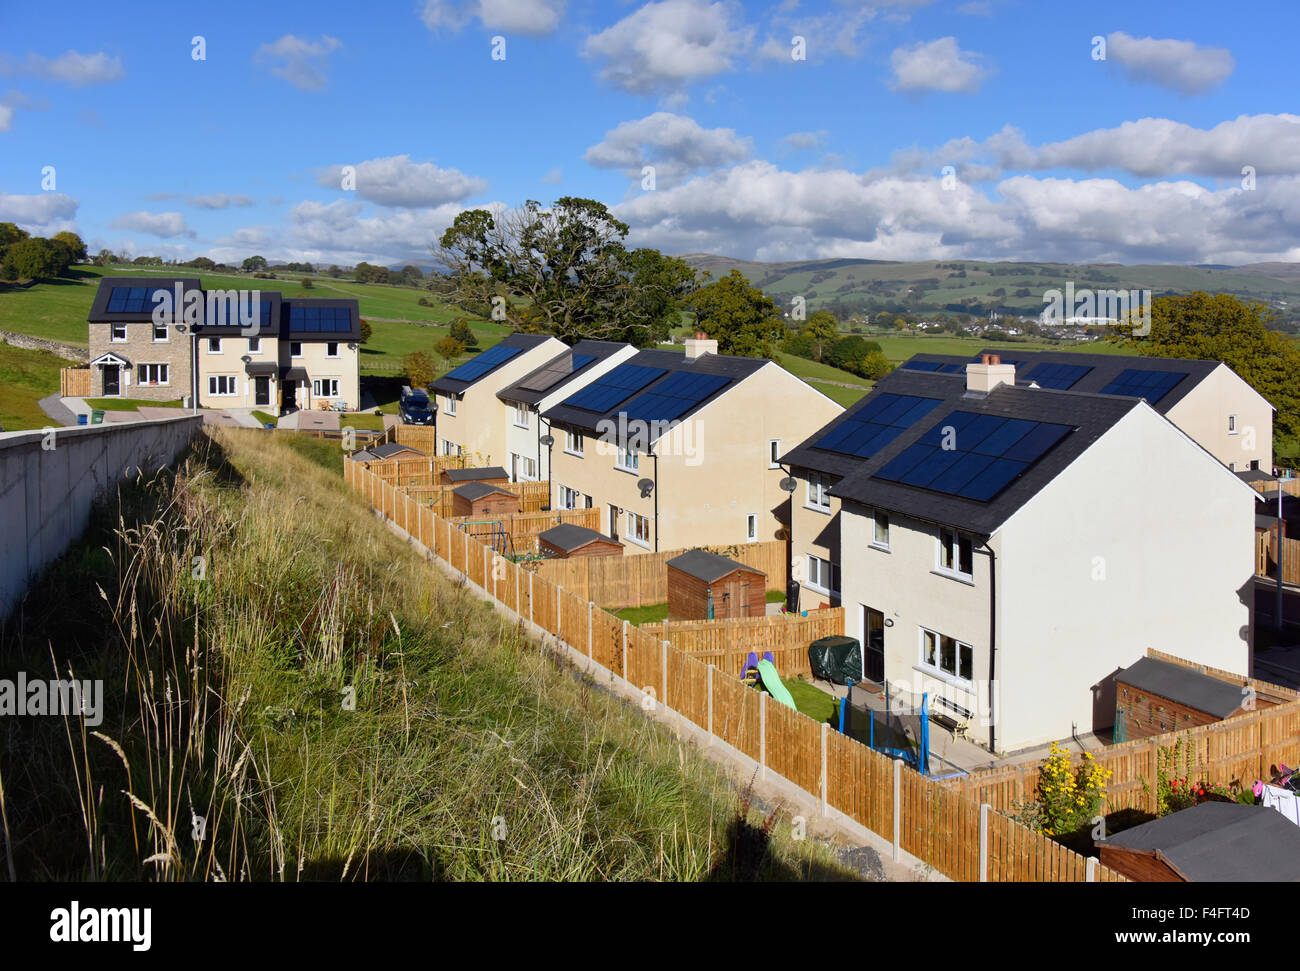 New affordable domestic housing with solar panels on roof. Fir Tree Rise, Kendal, Cumbria, England, United KIngdom, Europe. Stock Photo